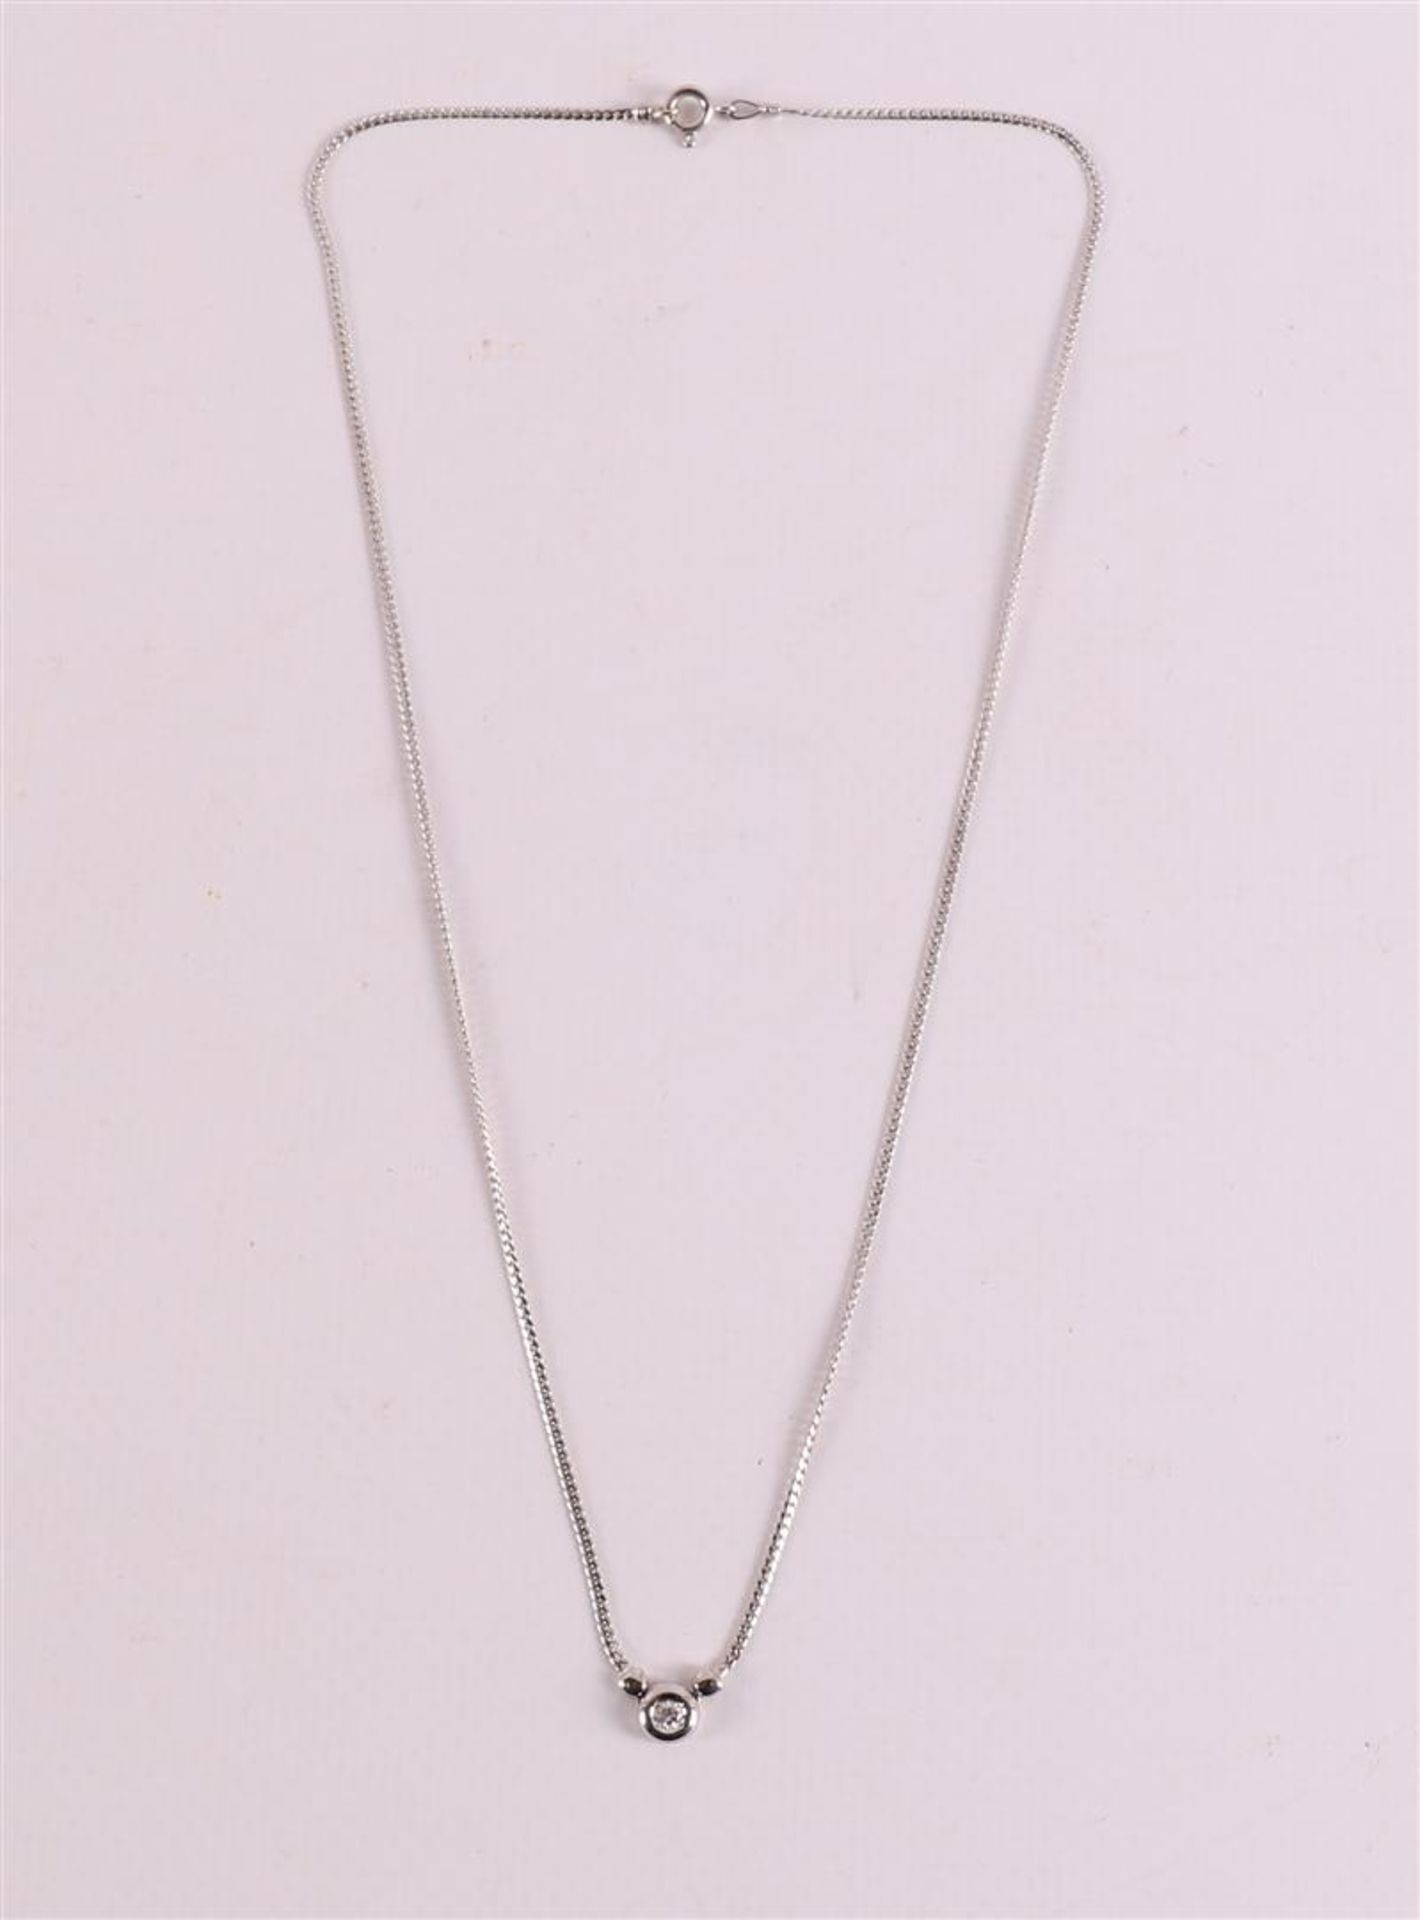 An 18 kt white gold necklace with a brilliant cut diamond.